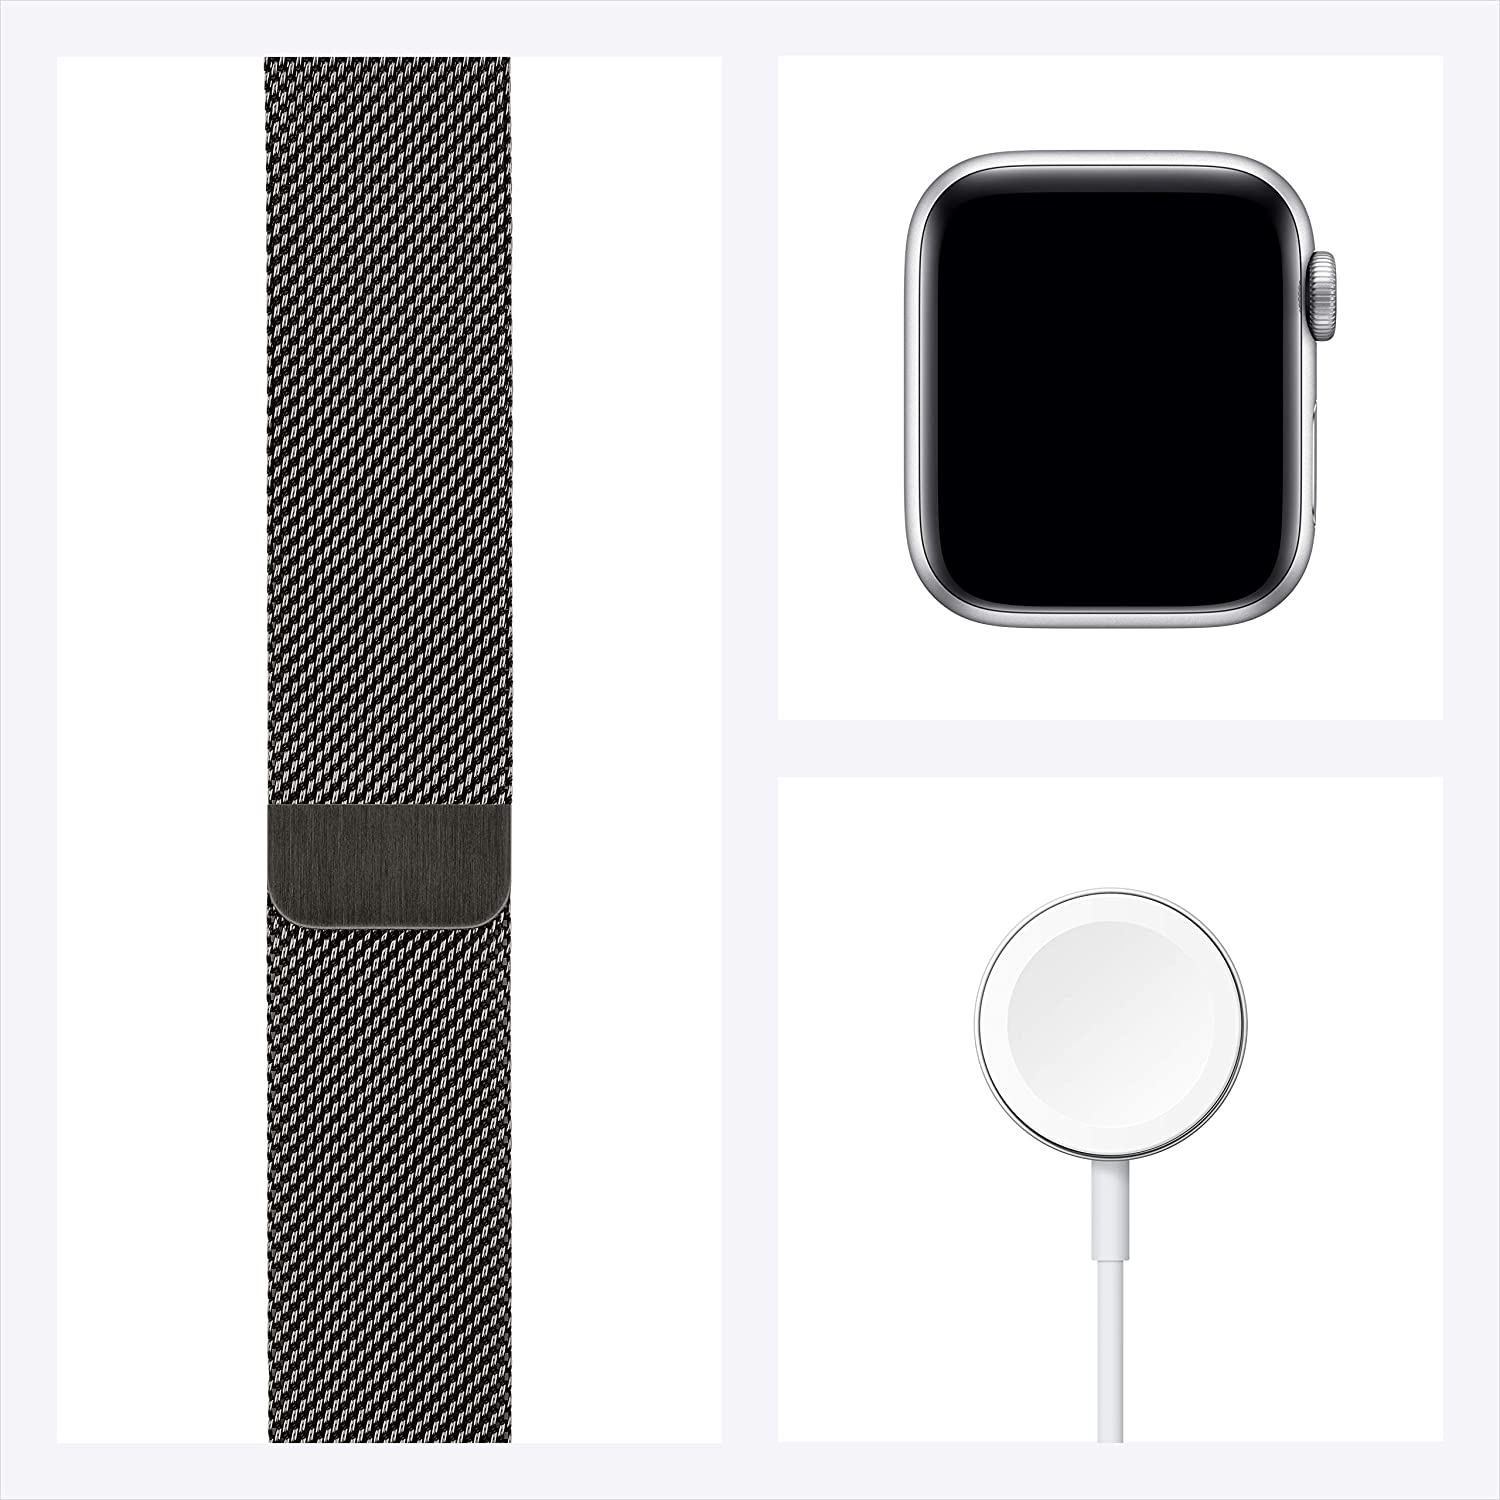 Apple Watch Series 6 (GPS + Cellular, 40mm) - Graphite Stainless Steel Case with Graphite Milanese Loop